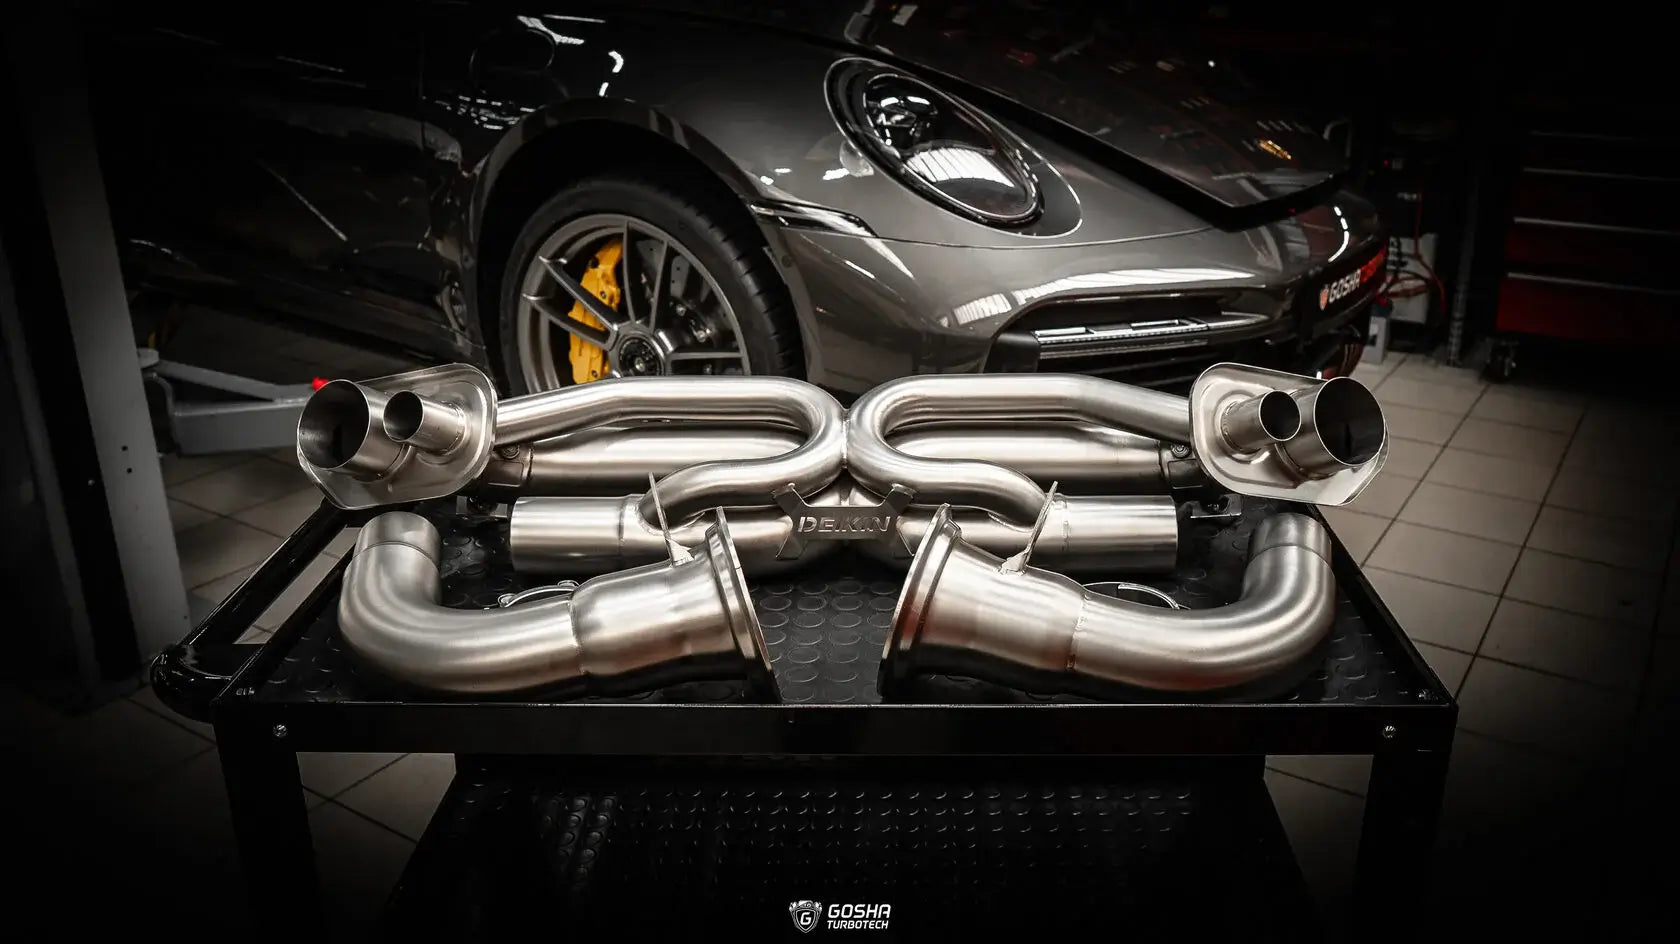 DEIKIN 10-PO.911.T/TS.992.R-ES-DP-Ti-00 Exhaust system "Race" Titan for Porsche 911 Turbo/Turbo S (992) complete with downpipes without HeatShield Photo-7 